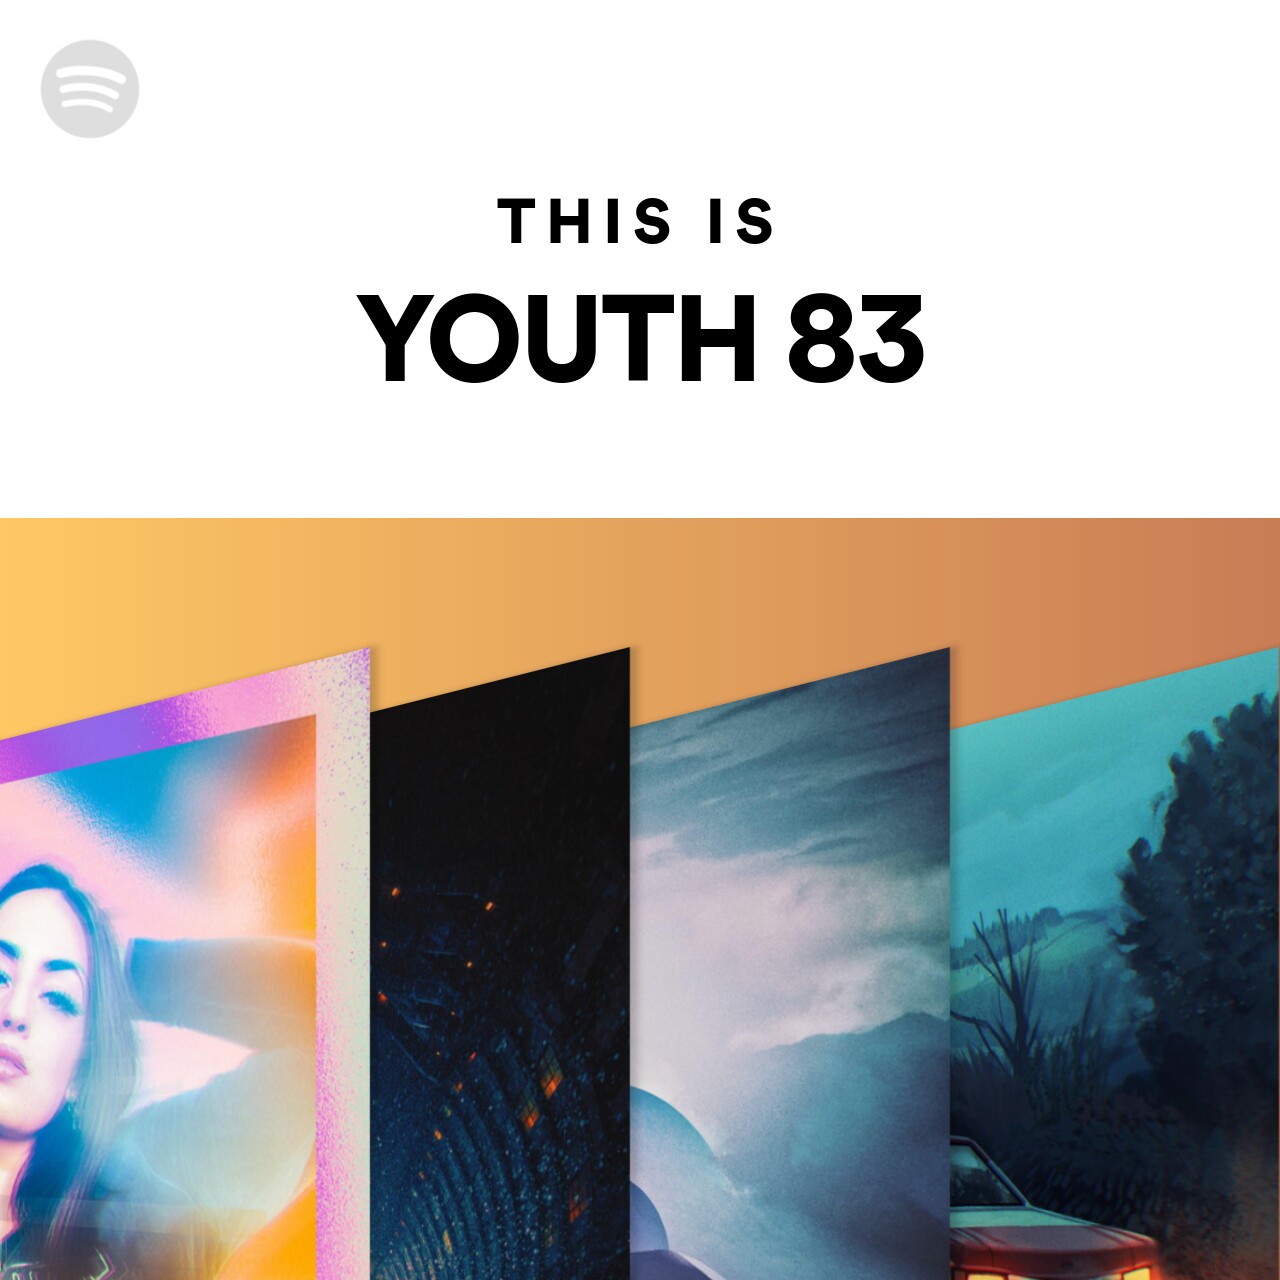 This Is YOUTH 83